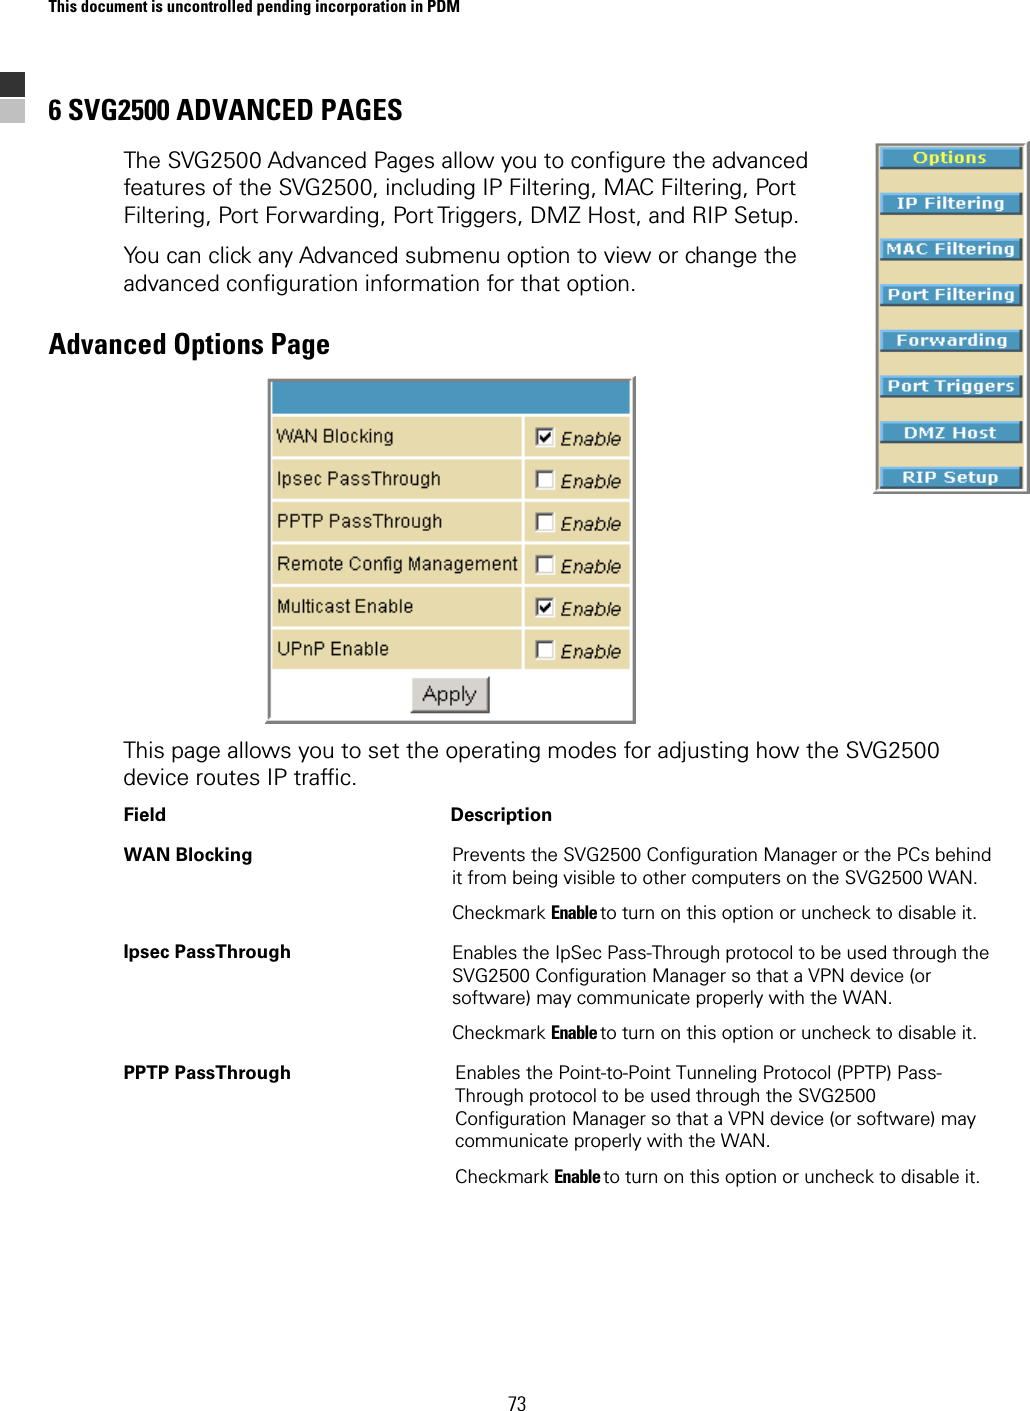 This document is uncontrolled pending incorporation in PDM  73 6 SVG2500 ADVANCED PAGES The SVG2500 Advanced Pages allow you to configure the advanced features of the SVG2500, including IP Filtering, MAC Filtering, Port Filtering, Port Forwarding, Port Triggers, DMZ Host, and RIP Setup. You can click any Advanced submenu option to view or change the advanced configuration information for that option. Advanced Options Page  This page allows you to set the operating modes for adjusting how the SVG2500 device routes IP traffic.  Field   Description WAN Blocking  Prevents the SVG2500 Configuration Manager or the PCs behind it from being visible to other computers on the SVG2500 WAN. Checkmark Enable to turn on this option or uncheck to disable it. Ipsec PassThrough  Enables the IpSec Pass-Through protocol to be used through the SVG2500 Configuration Manager so that a VPN device (or software) may communicate properly with the WAN. Checkmark Enable to turn on this option or uncheck to disable it. PPTP PassThrough  Enables the Point-to-Point Tunneling Protocol (PPTP) Pass-Through protocol to be used through the SVG2500 Configuration Manager so that a VPN device (or software) may communicate properly with the WAN. Checkmark Enable to turn on this option or uncheck to disable it. 